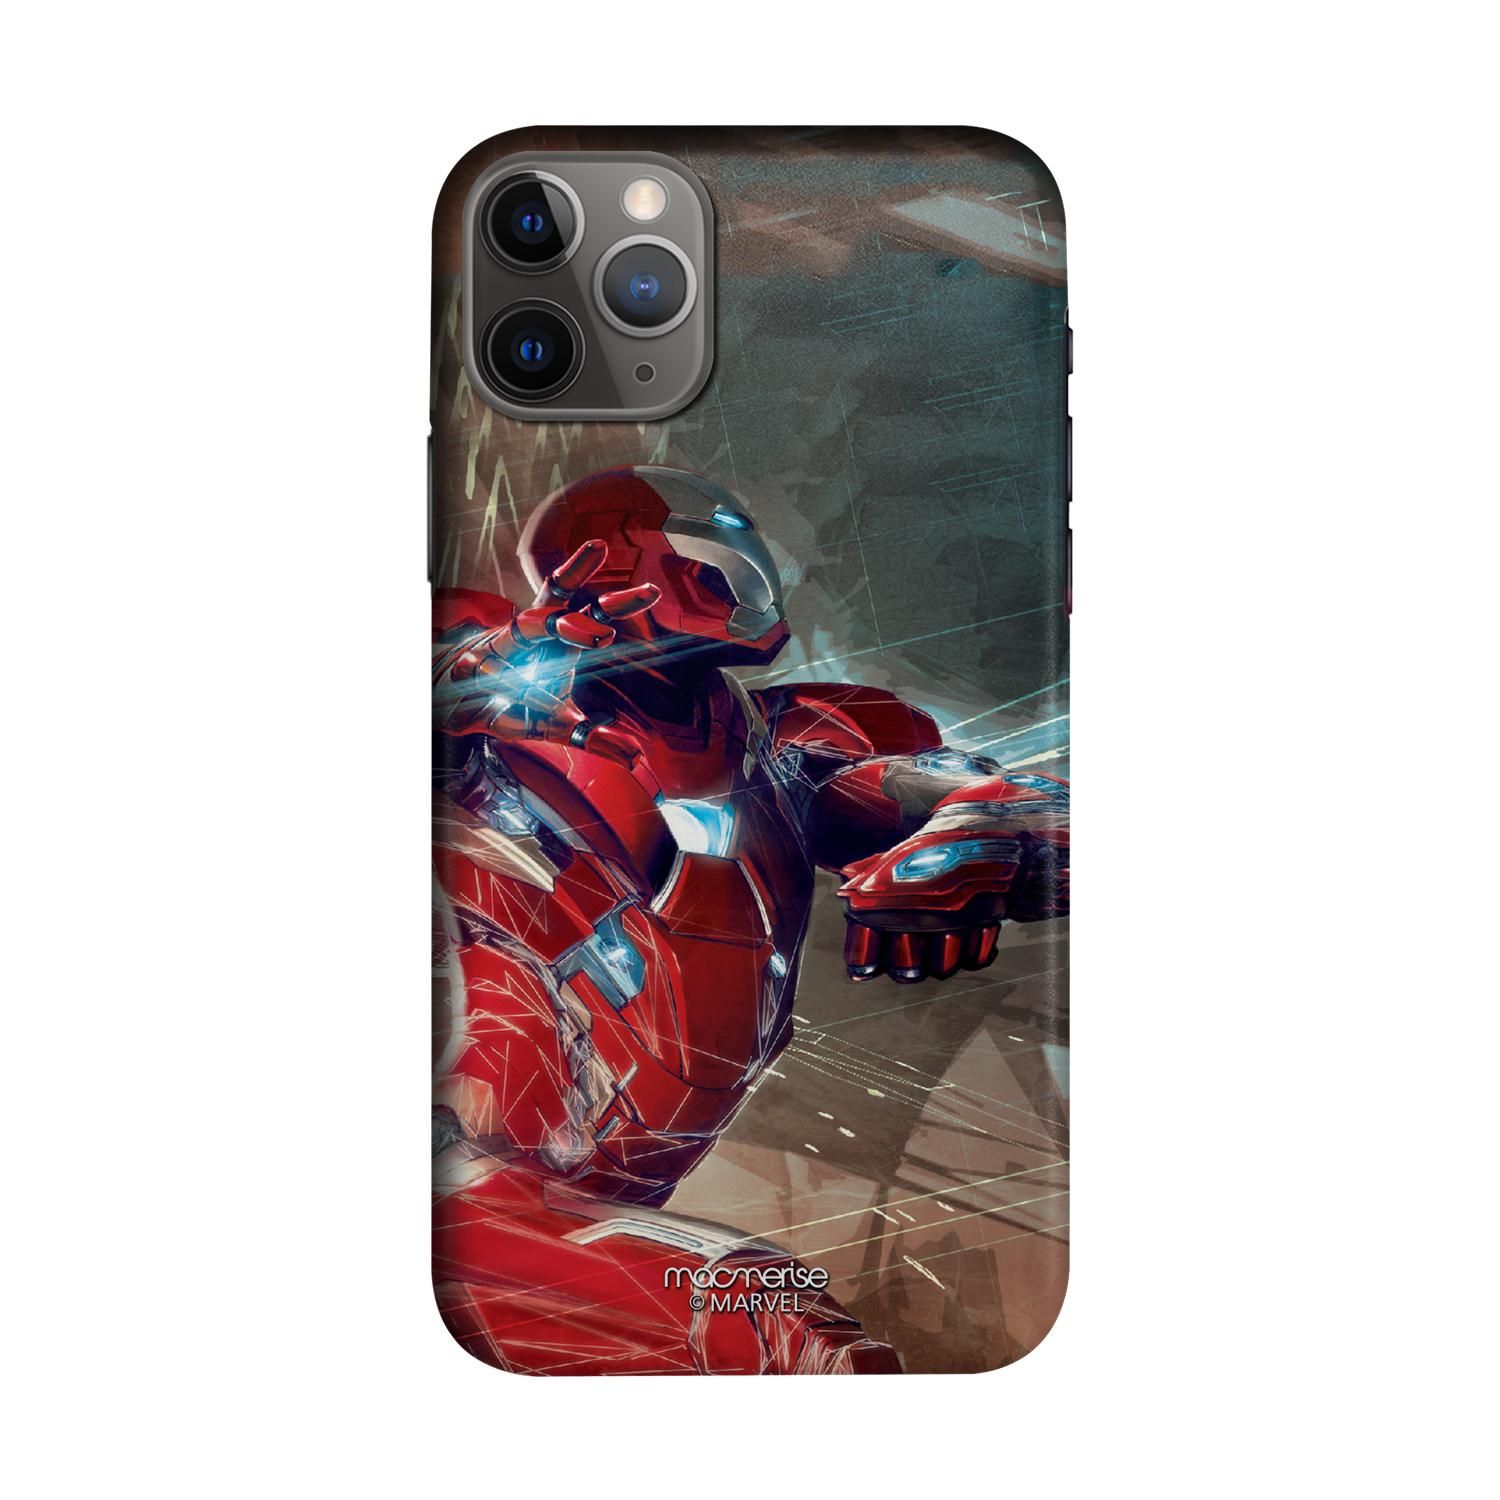 Buy Ironman Attack - Sleek Phone Case for iPhone 11 Pro Max Online